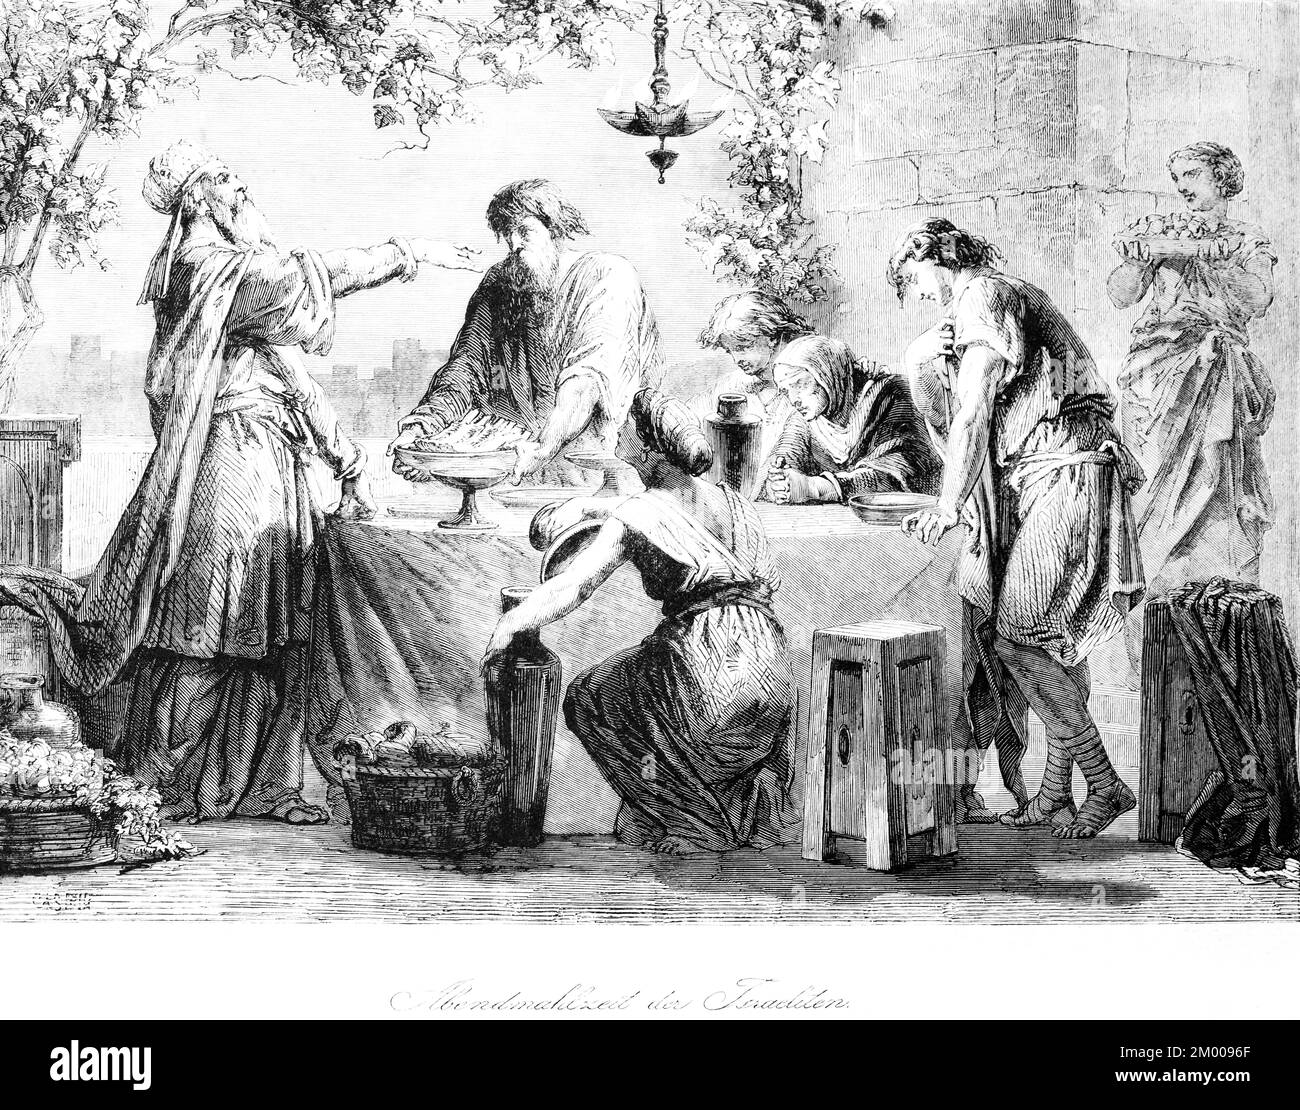 Israelites' supper, supper, group, sit, priest, table, stool, dine, outside, oil lamp, baskets, speak, Bible, Old Testament, Book of Deuteronomy, chap Stock Photo